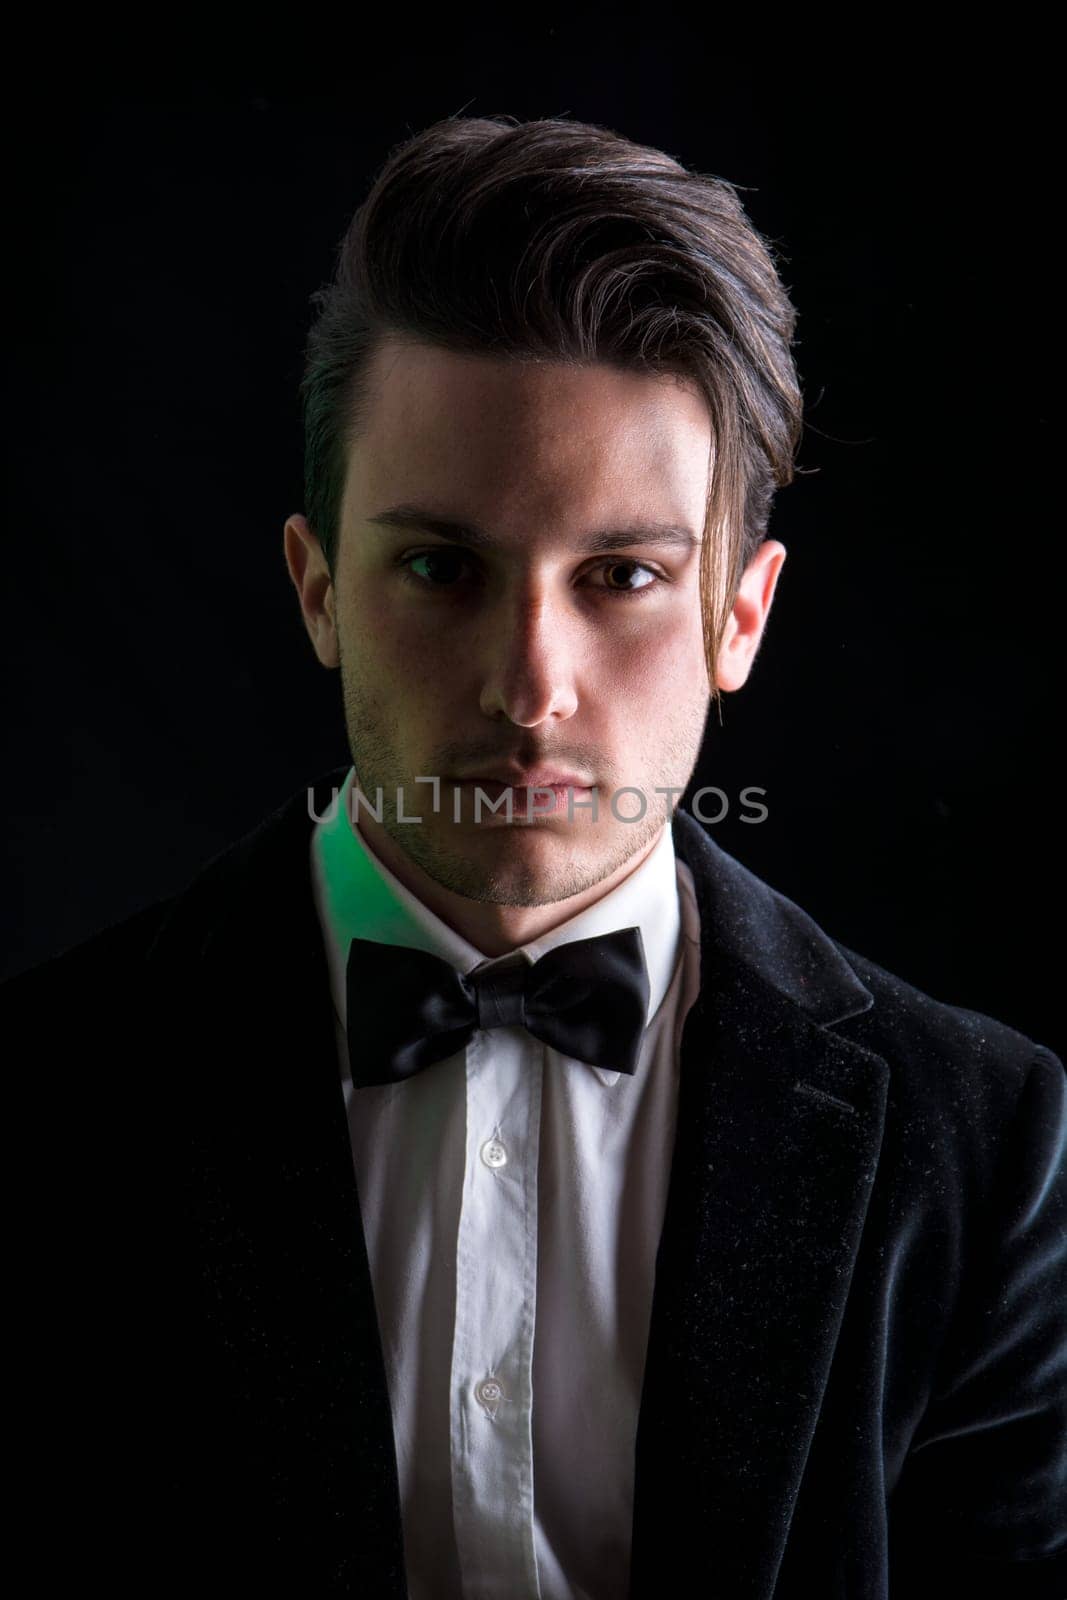 Photo of a stylish man in a suit and bow tie by artofphoto